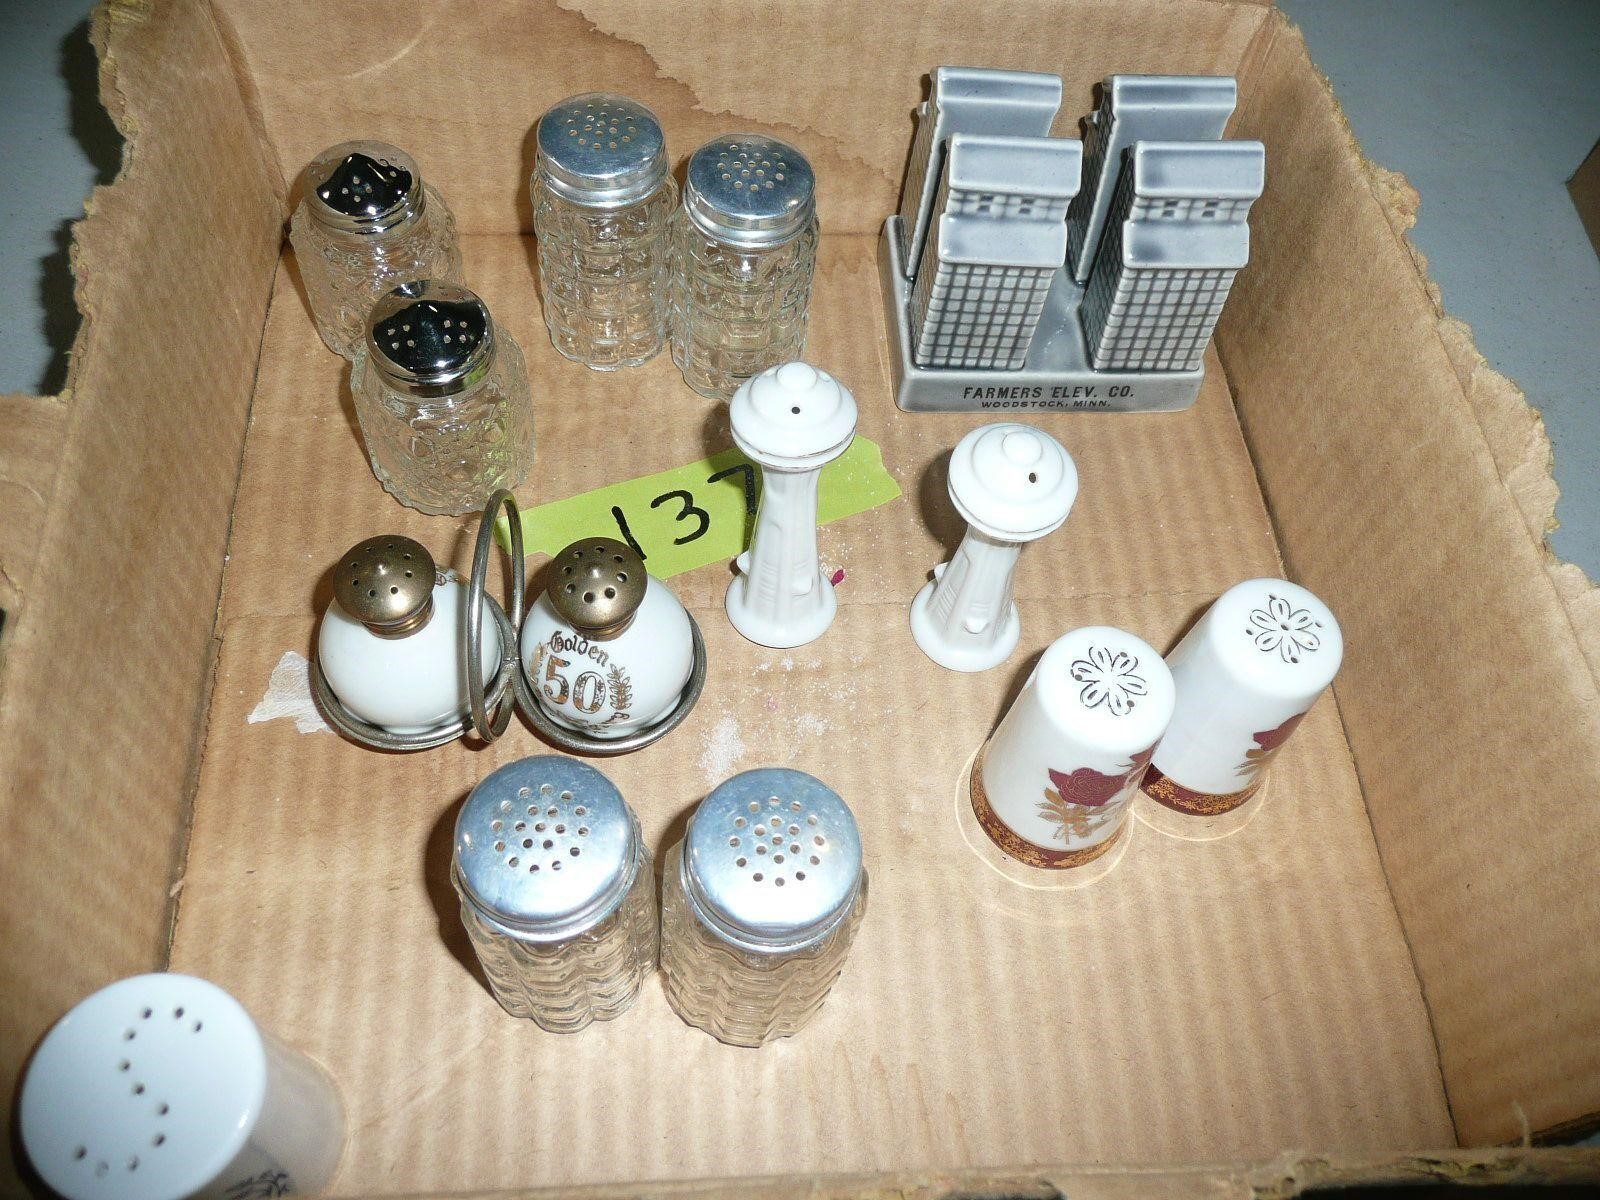 Assortment of Salt and Pepper Shakers